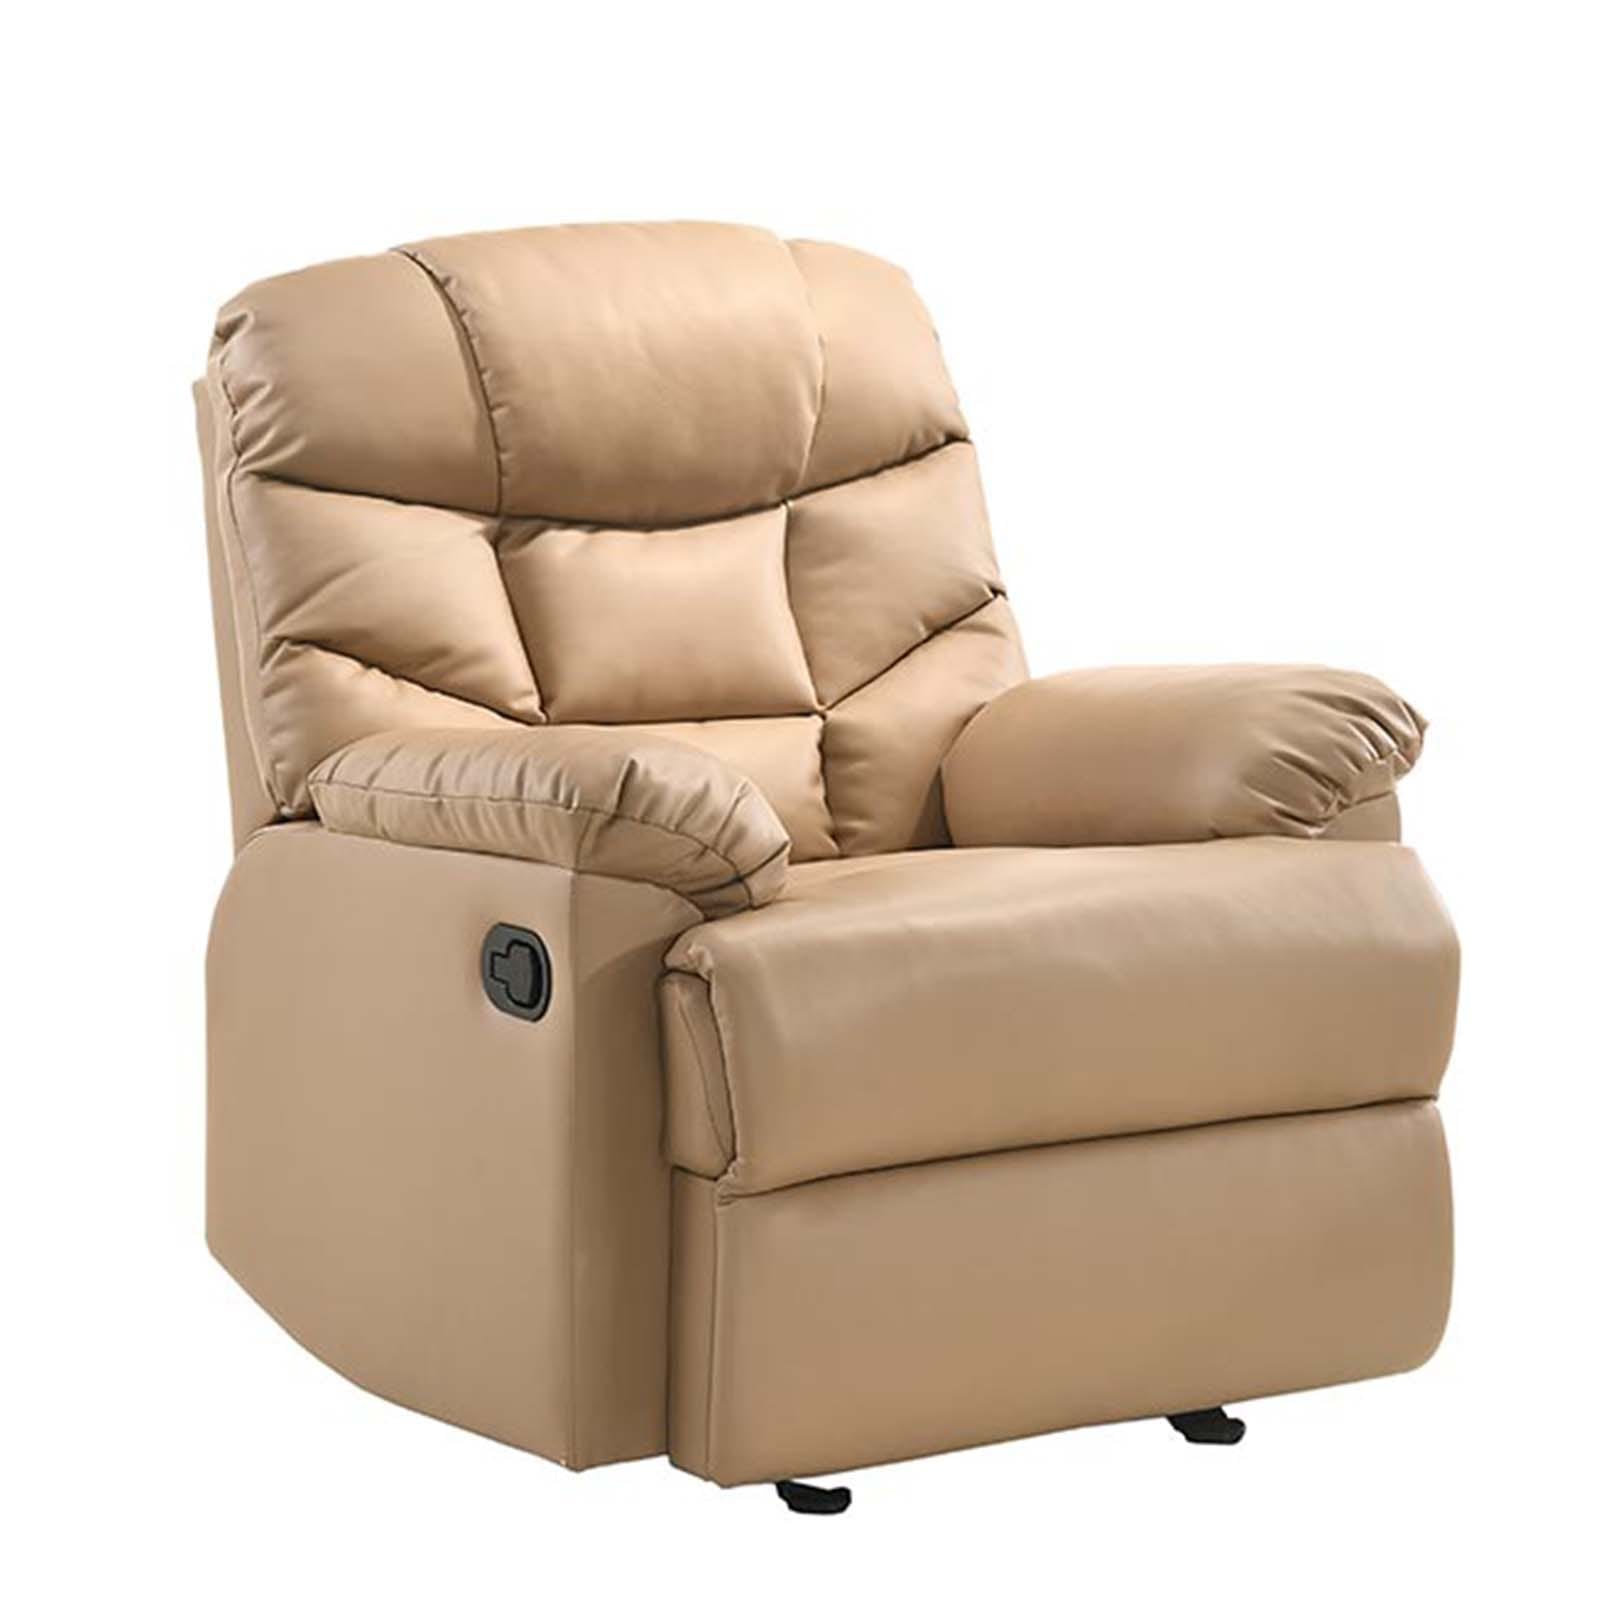 Leather Rocking Recliner Chair - Beige | Buy Recliner Chairs - 1095835